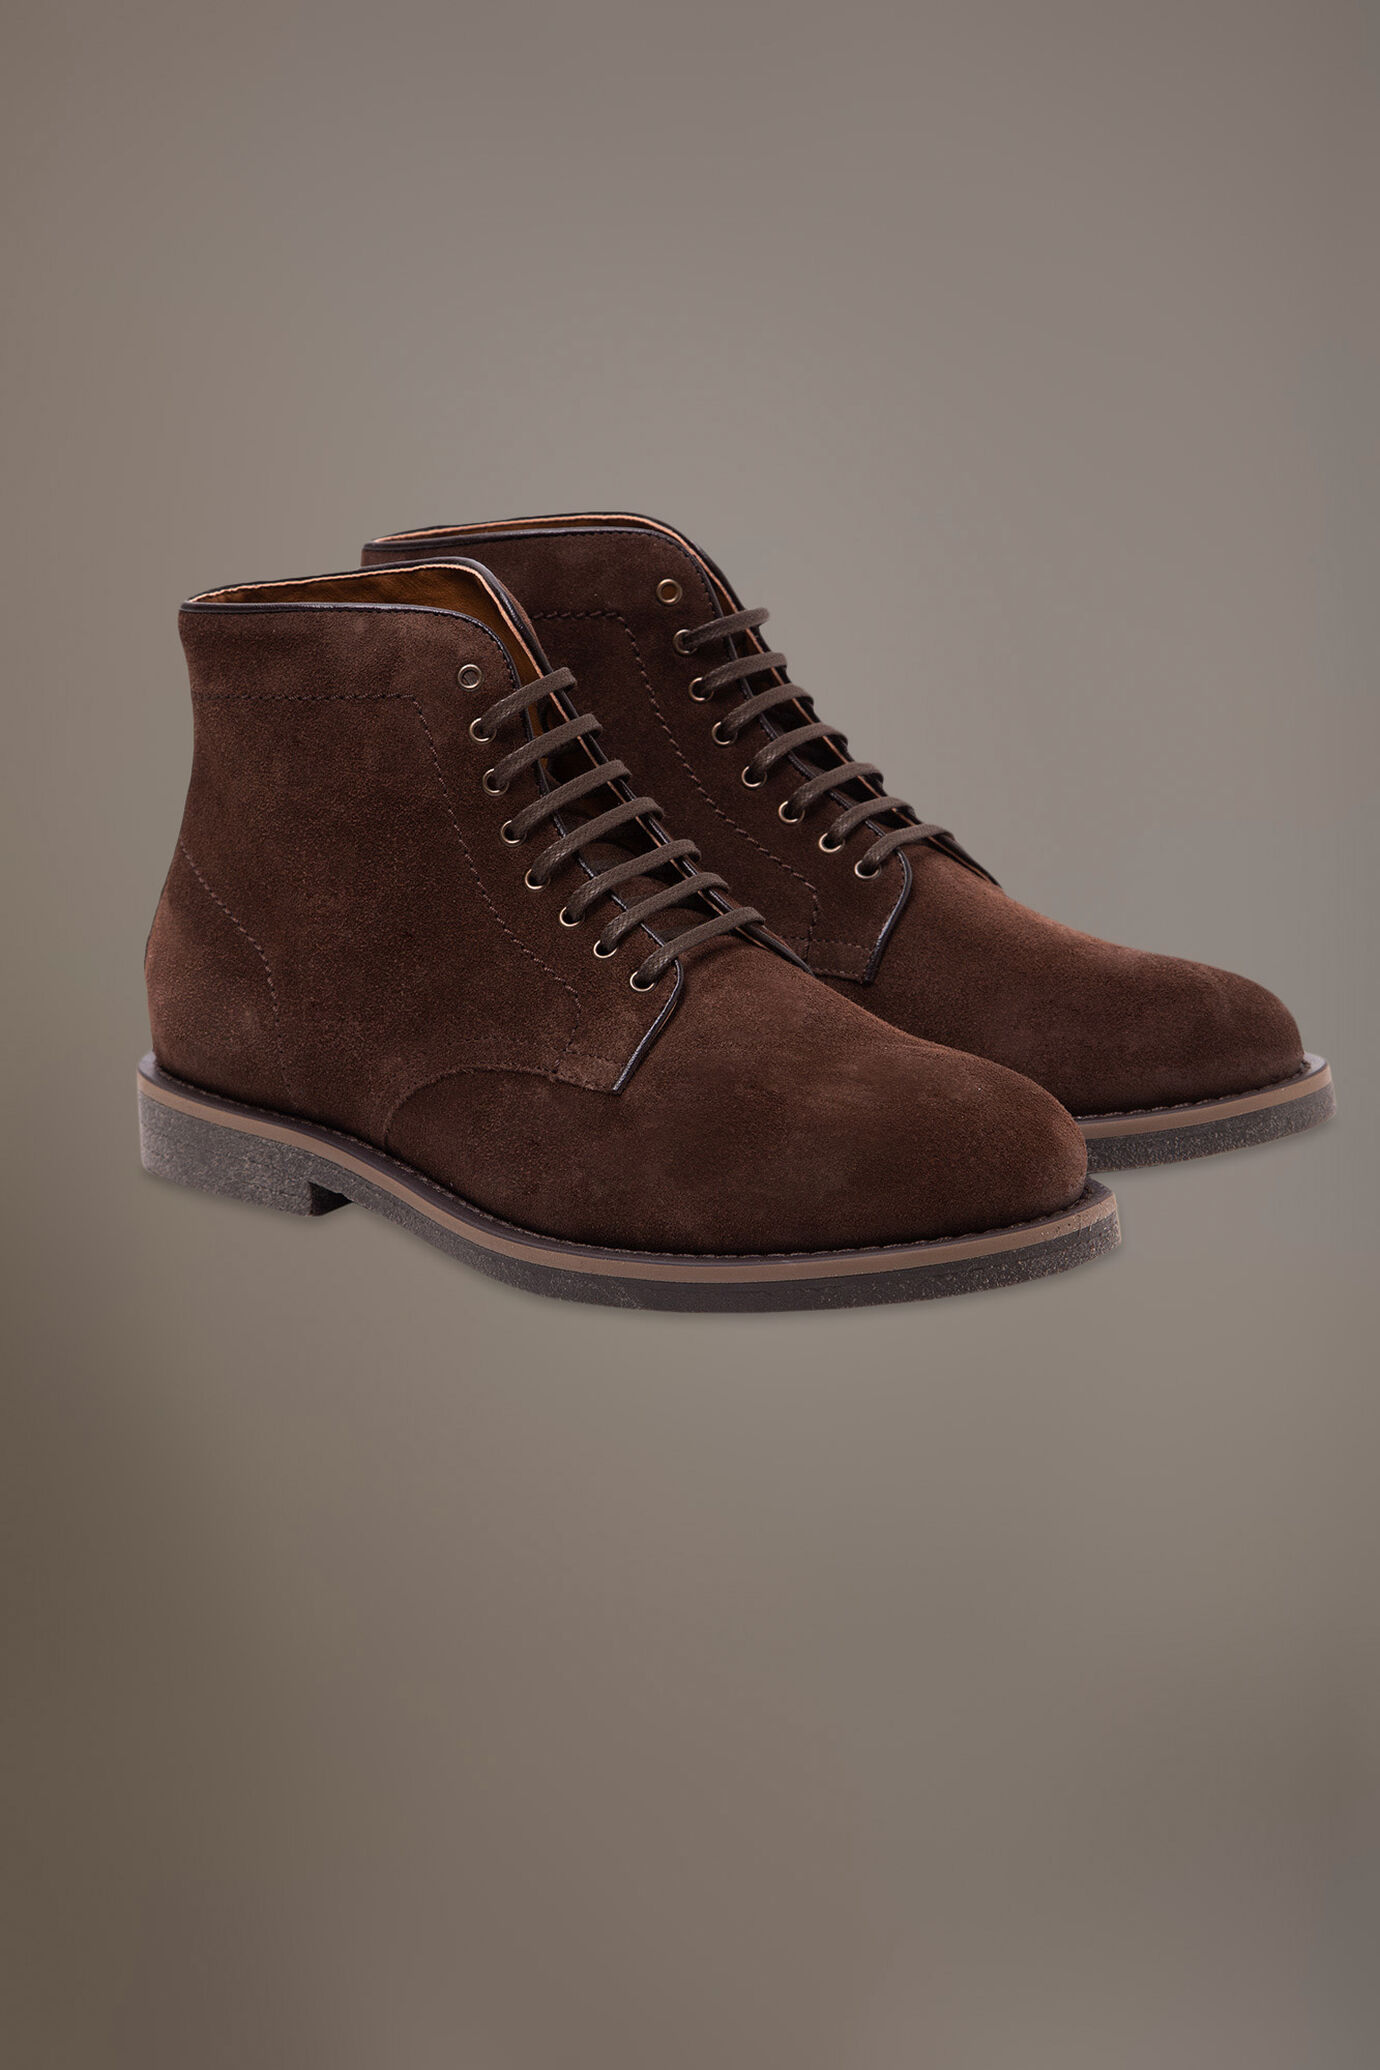 Suede boots - 100% leather